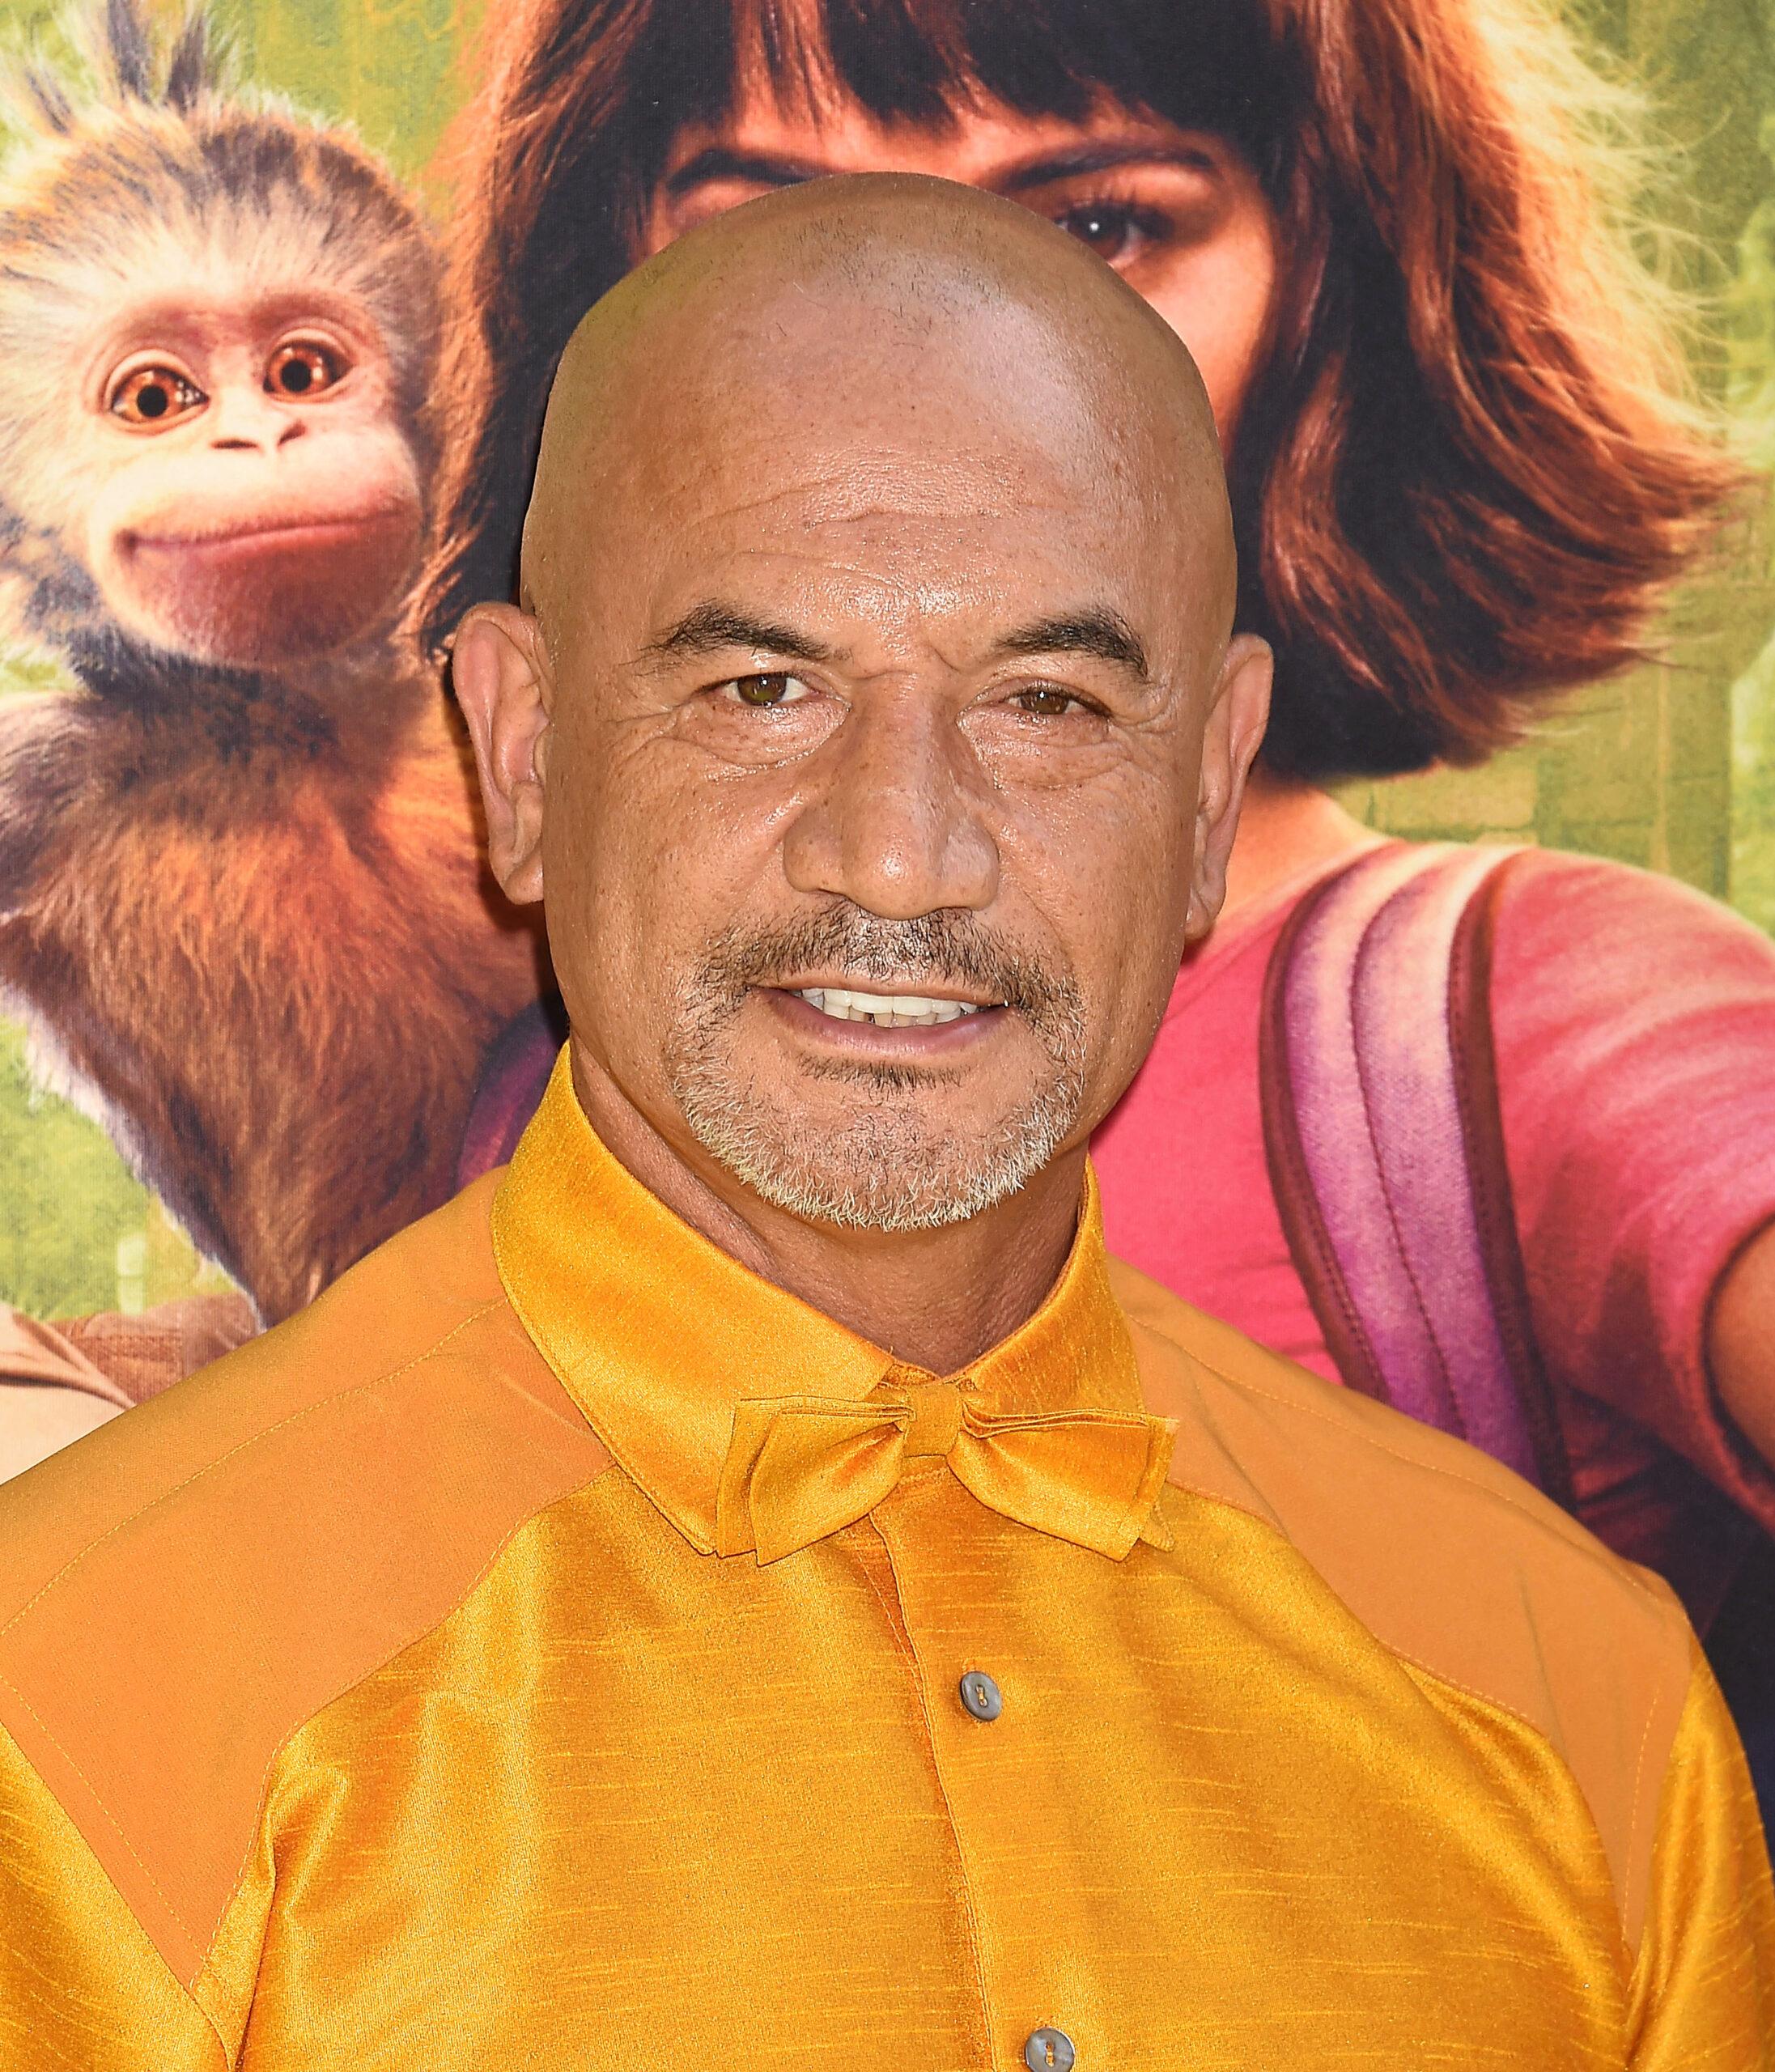 Temuera Morrison at LA Premiere Of Paramount Pictures' "Dora And The Lost City Of Gold" - Arrivals